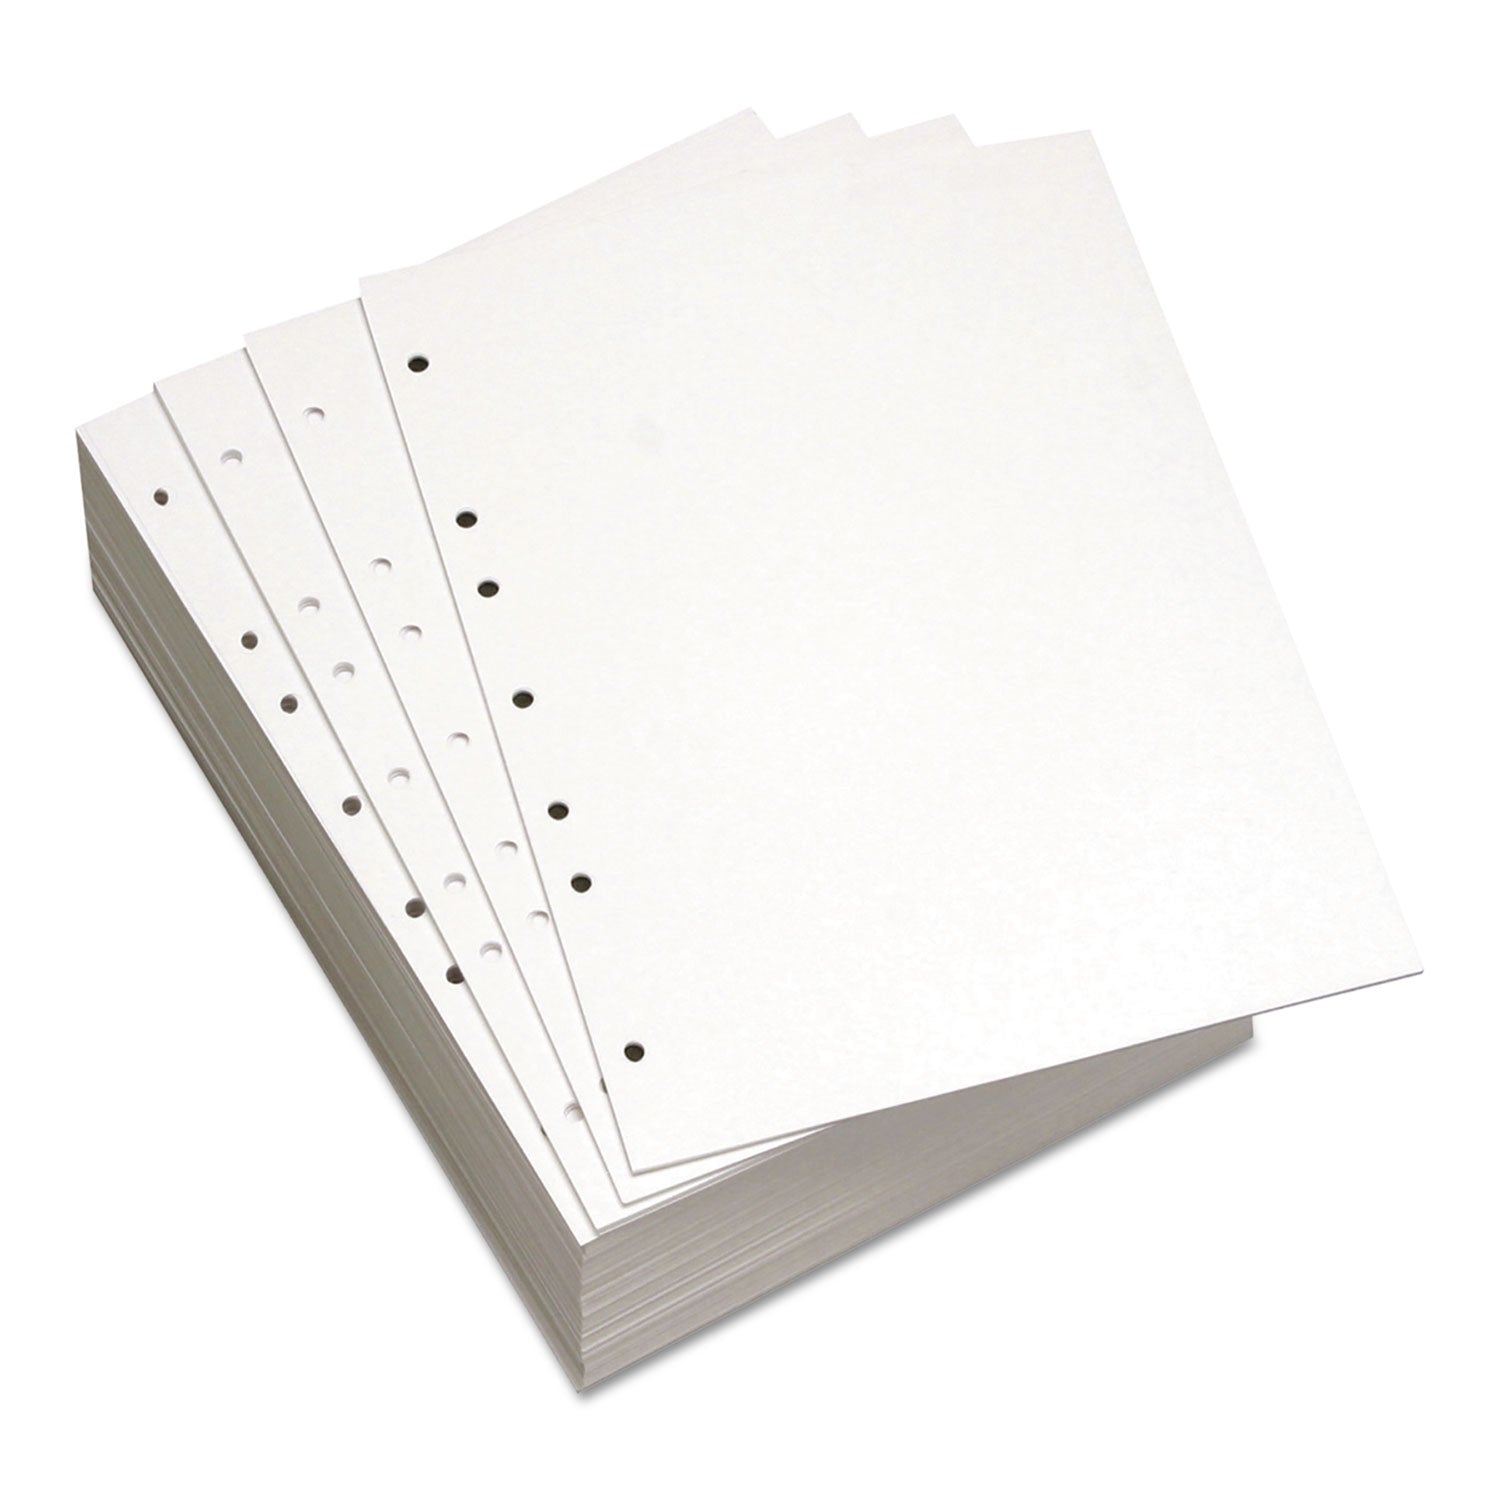 custom-cut-sheet-copy-paper-92-bright-7-hole-side-punched-20-lb-bond-weight-85-x-11-white-500-ream_dmr851271 - 2